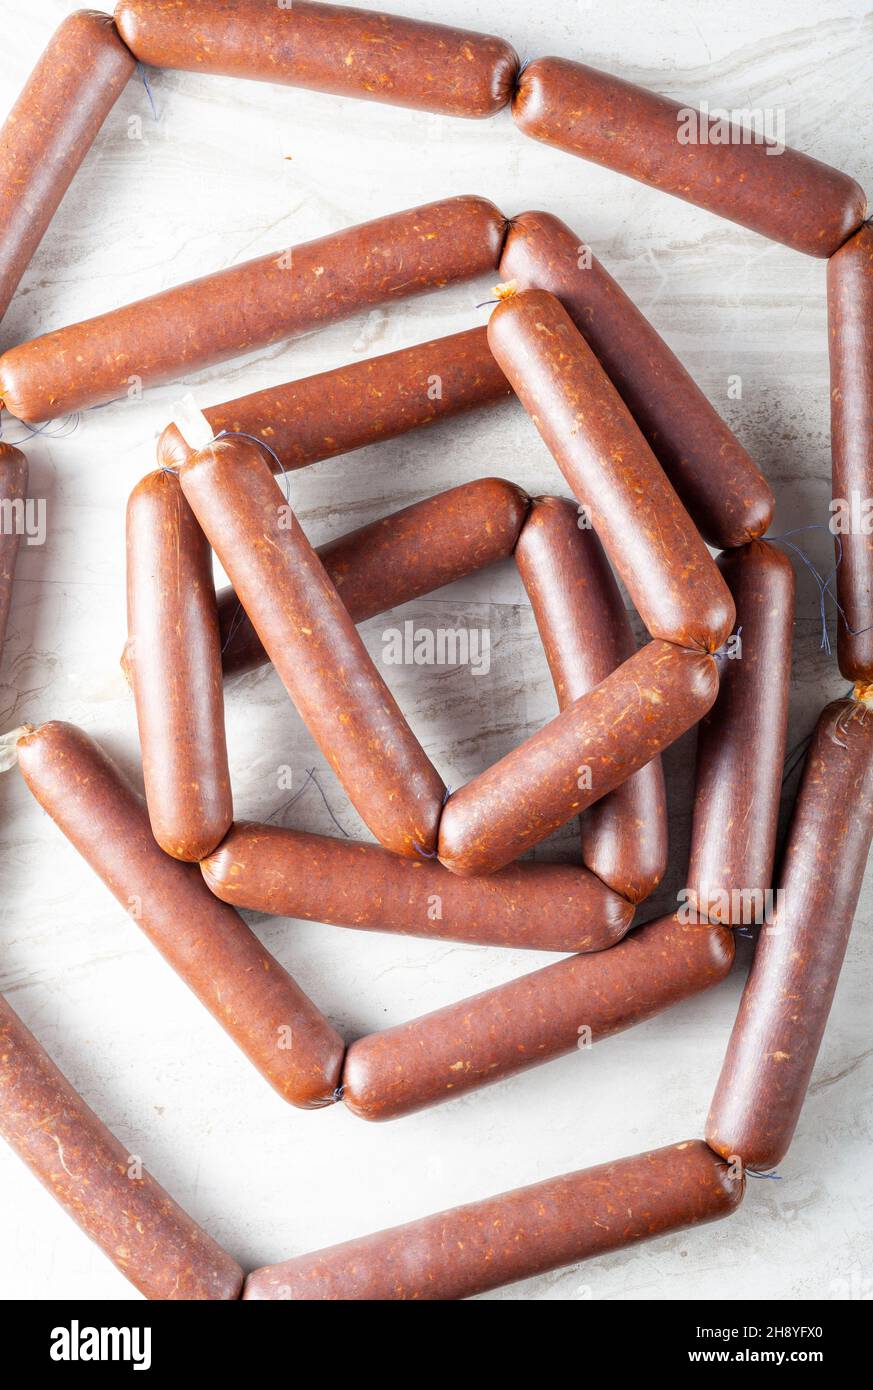 Closeup isolated image of strings of homemade sucuk or sausage stuffed in casing and made into strings before drying. Processed red meat consumption c Stock Photo